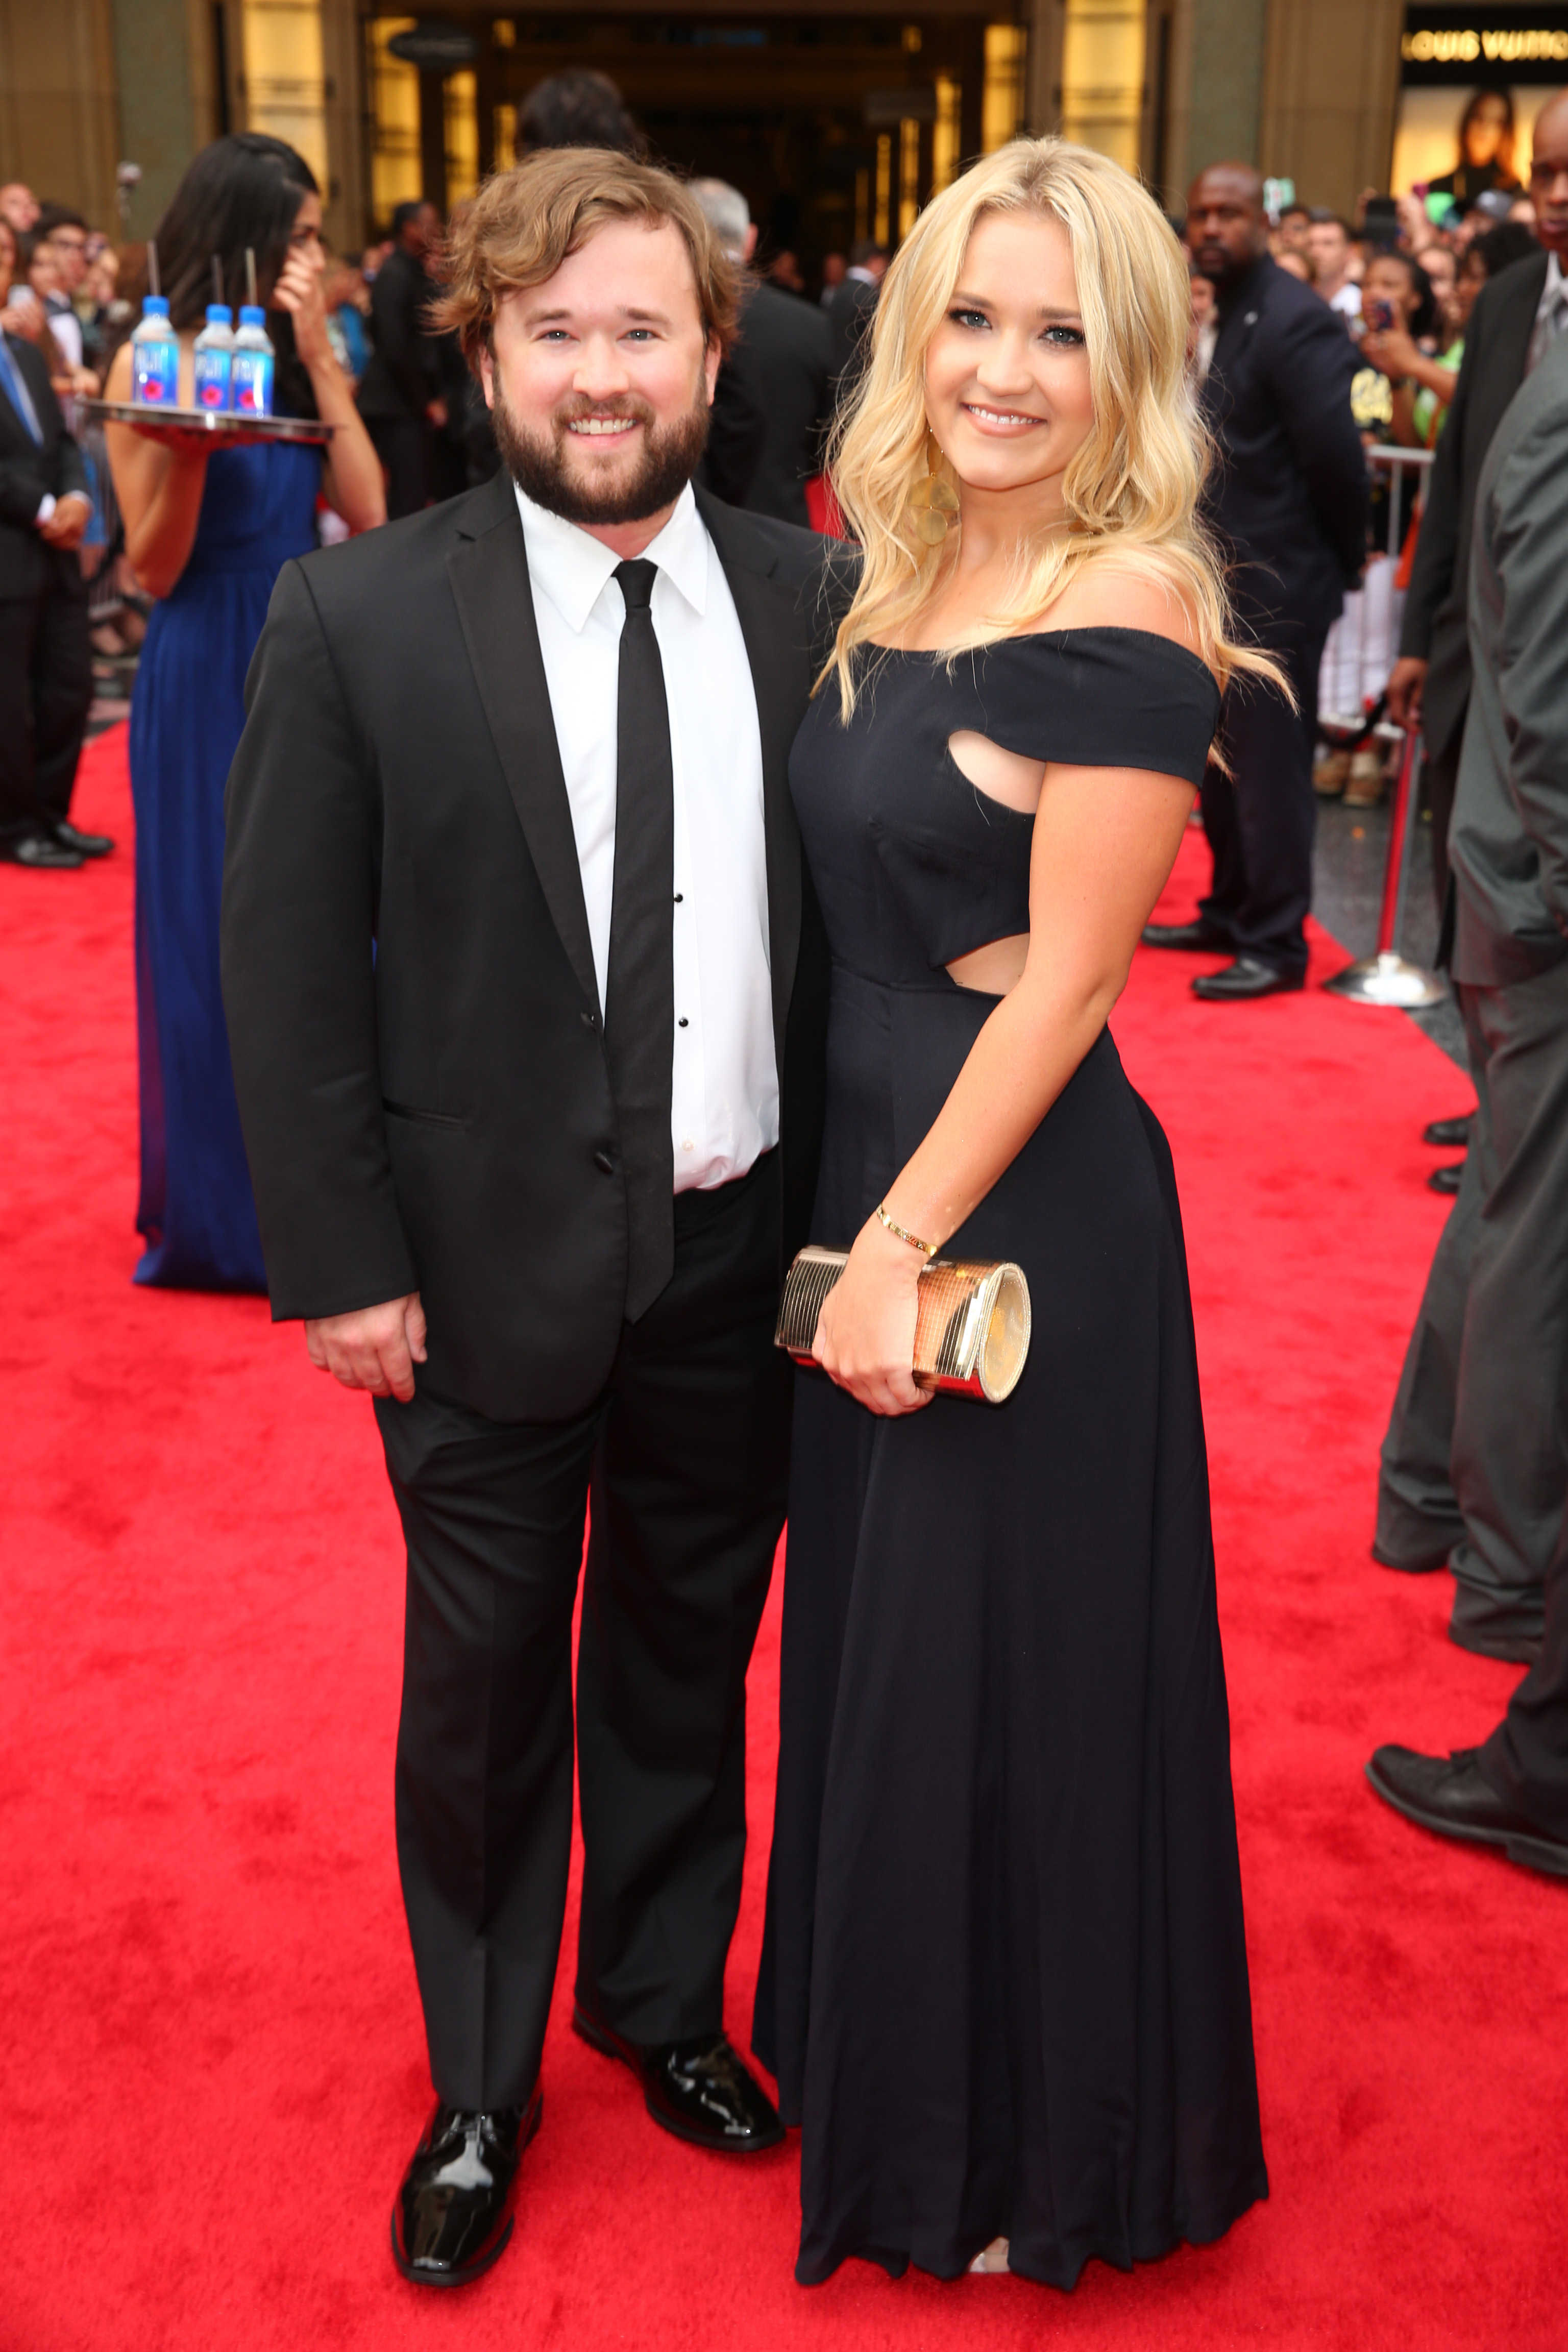 Haley Osment and Emily Osment attend the 44th AFI Life Achievement Award Gala Tribute honoring John Williams at Dolby Theatre on June 9, 2016 in Los Angeles, California. | Source: Getty Images